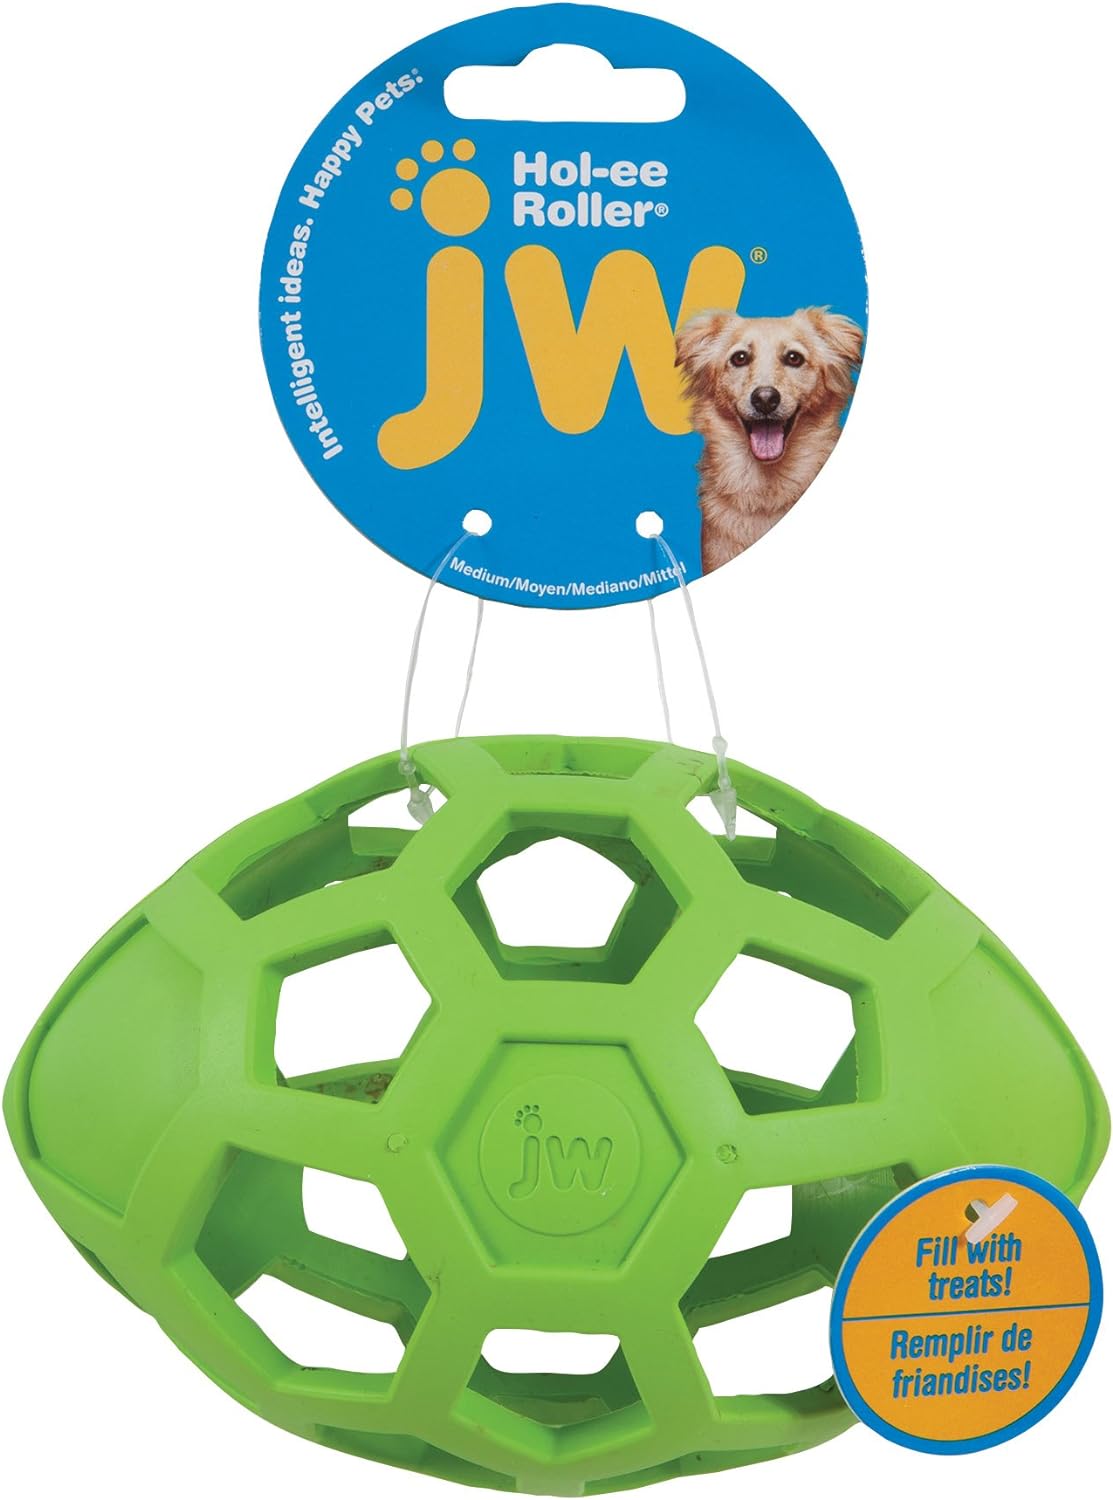 JW Pet Hol-ee Roller Dog Toy Puzzle Ball, Natural Rubber, Medium (4.5 Inch Diameter), Colors May Vary